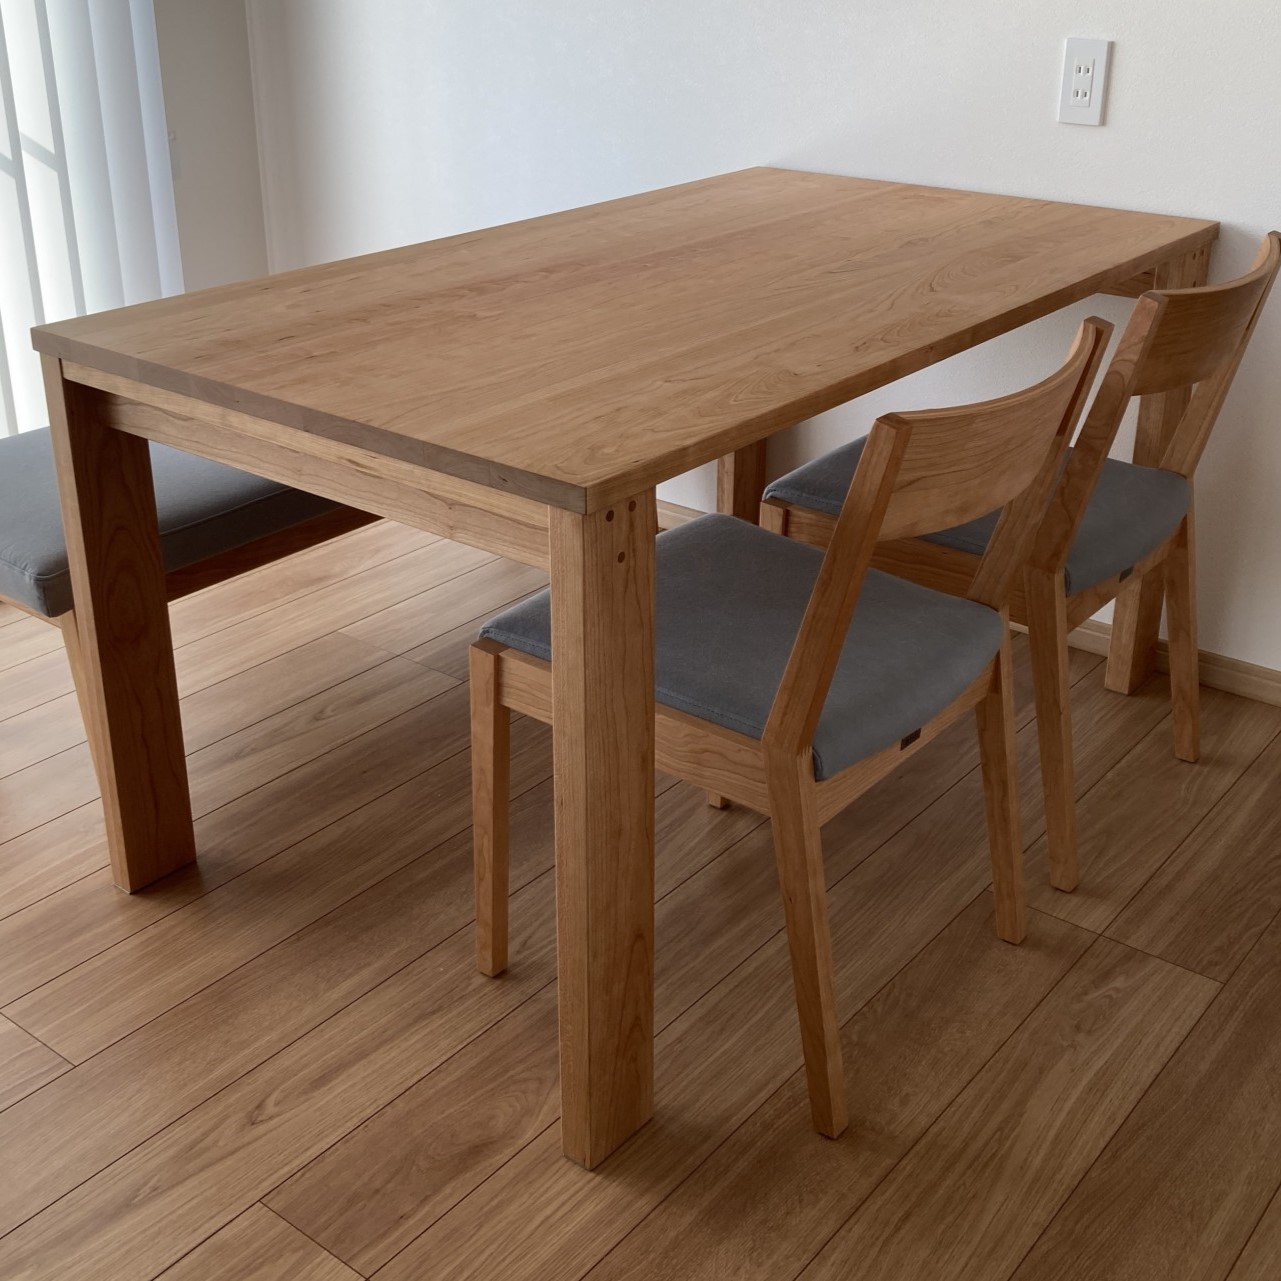 Cayman Dining table